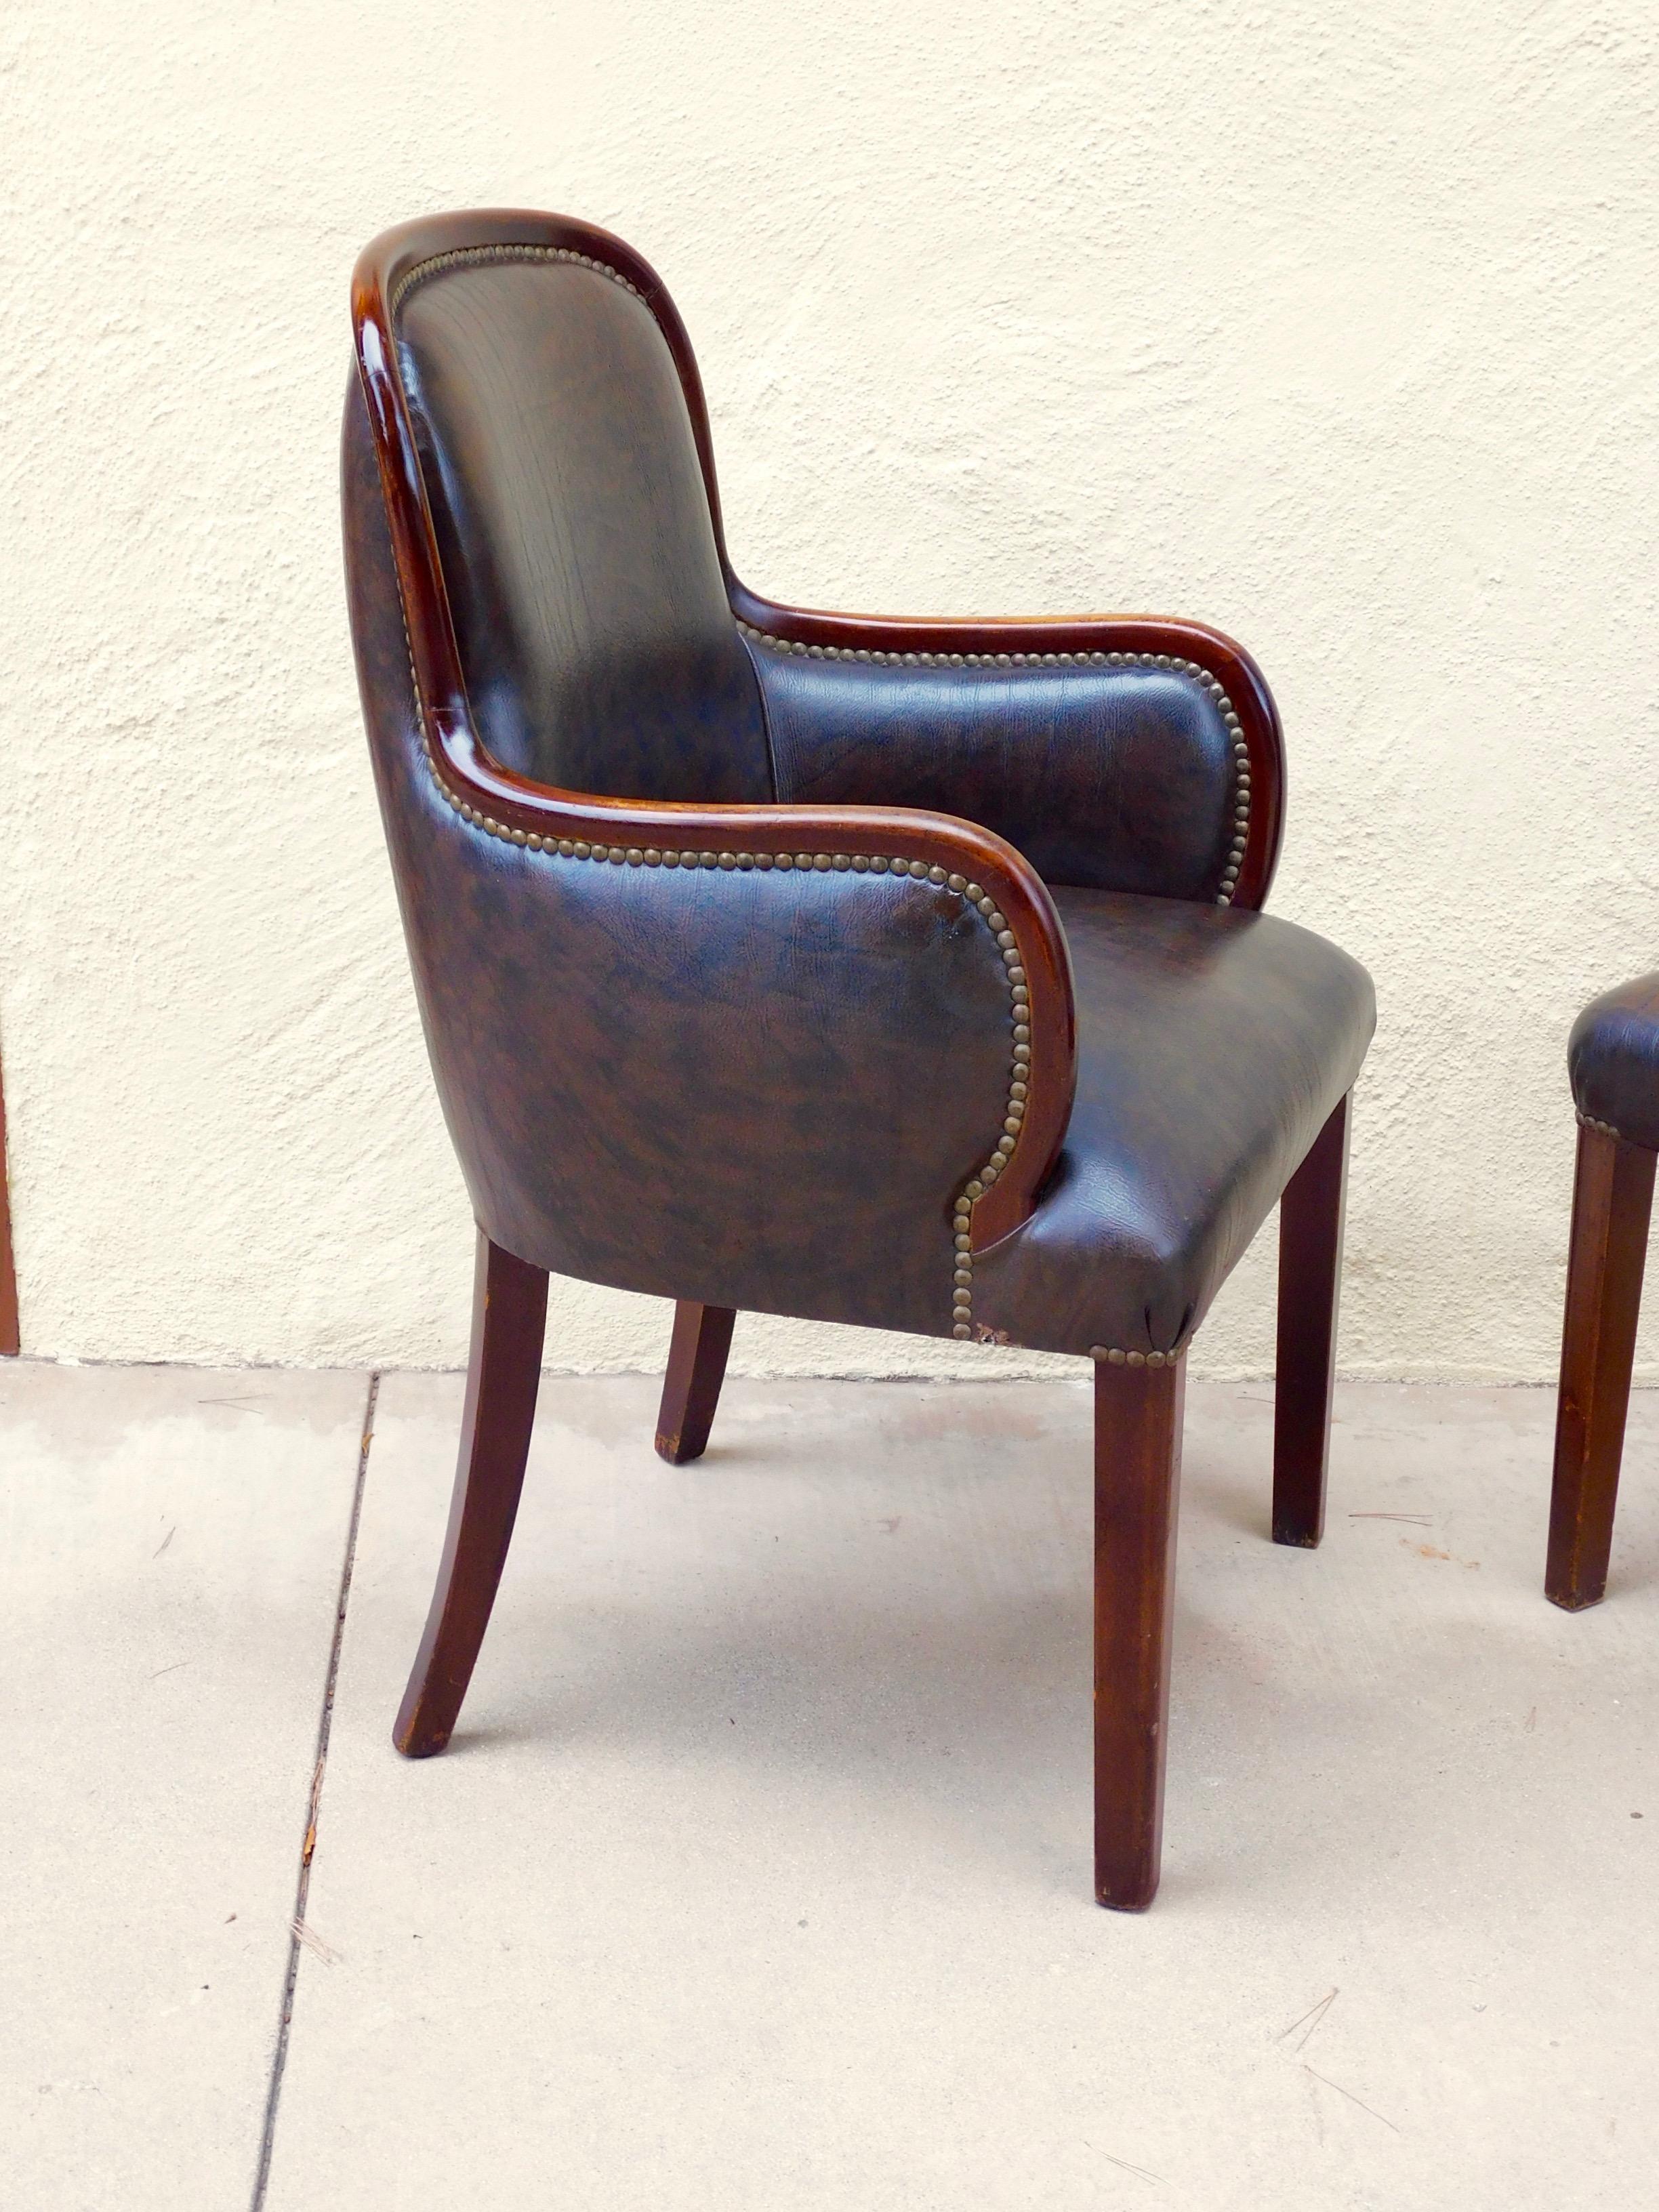 Set of six Argentine art moderne dining chairs, circa 1940.
Two captains chairs and four side chairs.
In mahogany with oak legs.
In very good original condition. Some wear is visible on the wood.
With original synthetic fabric in very good